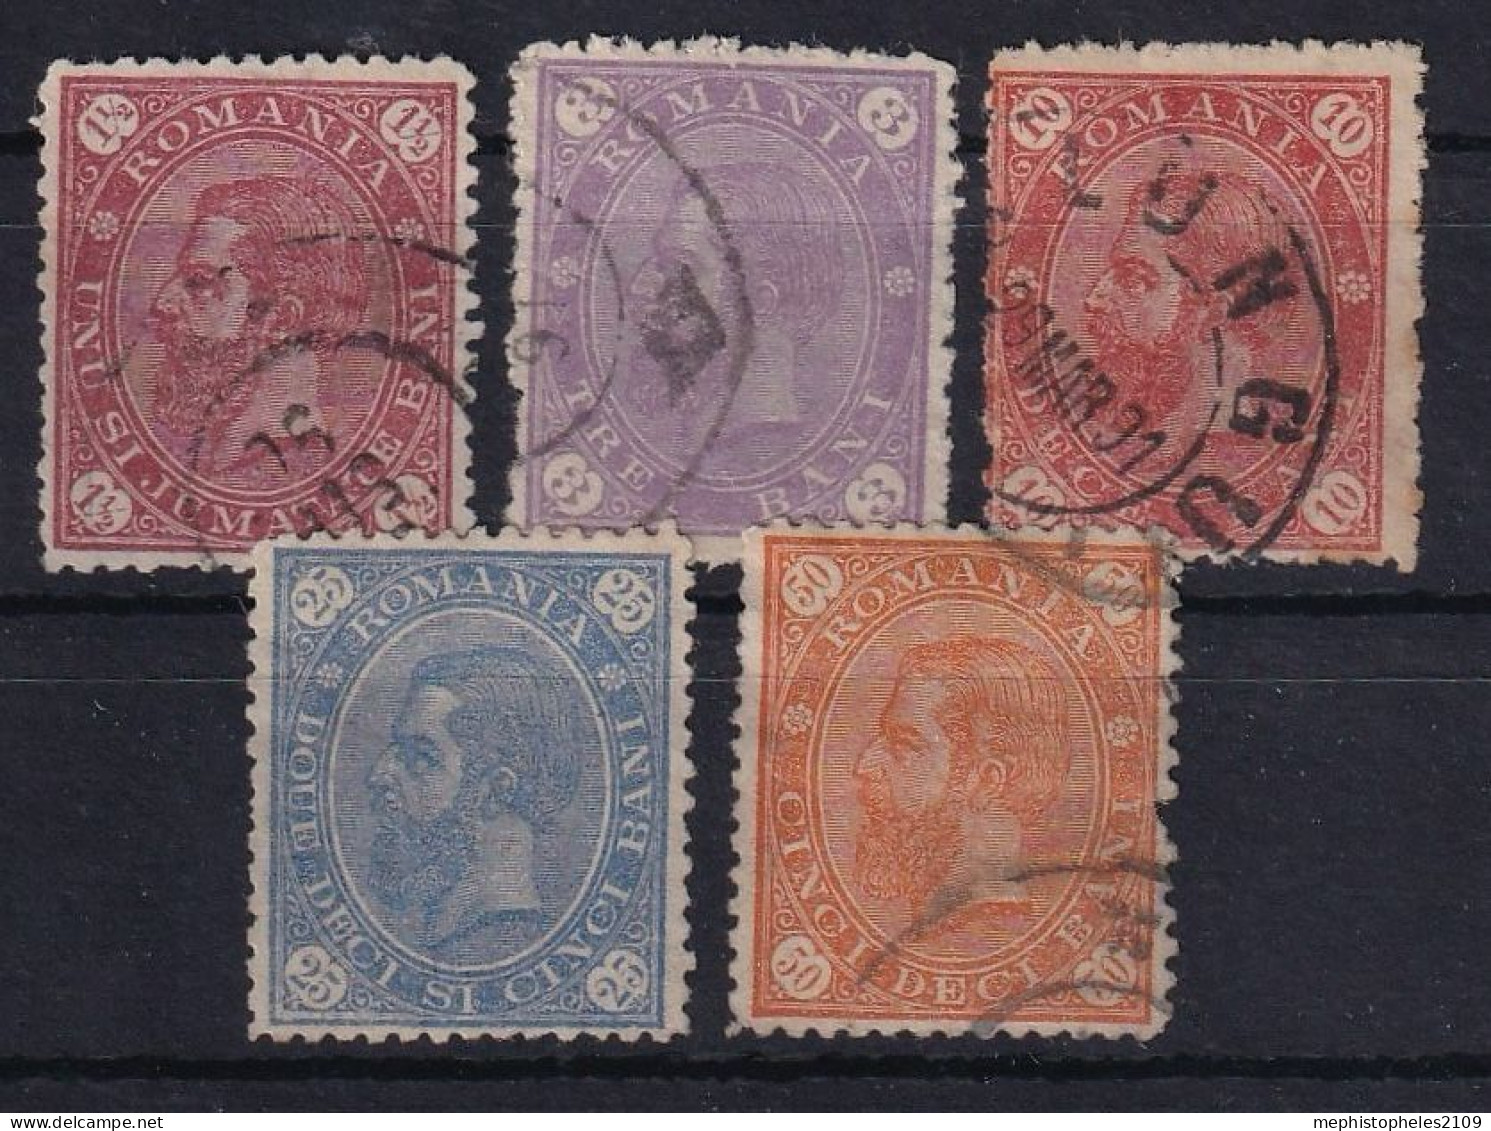 ROMANIA 1890 - Canceled - Sc# 94, 95, 97, 99, 100 - Used Stamps